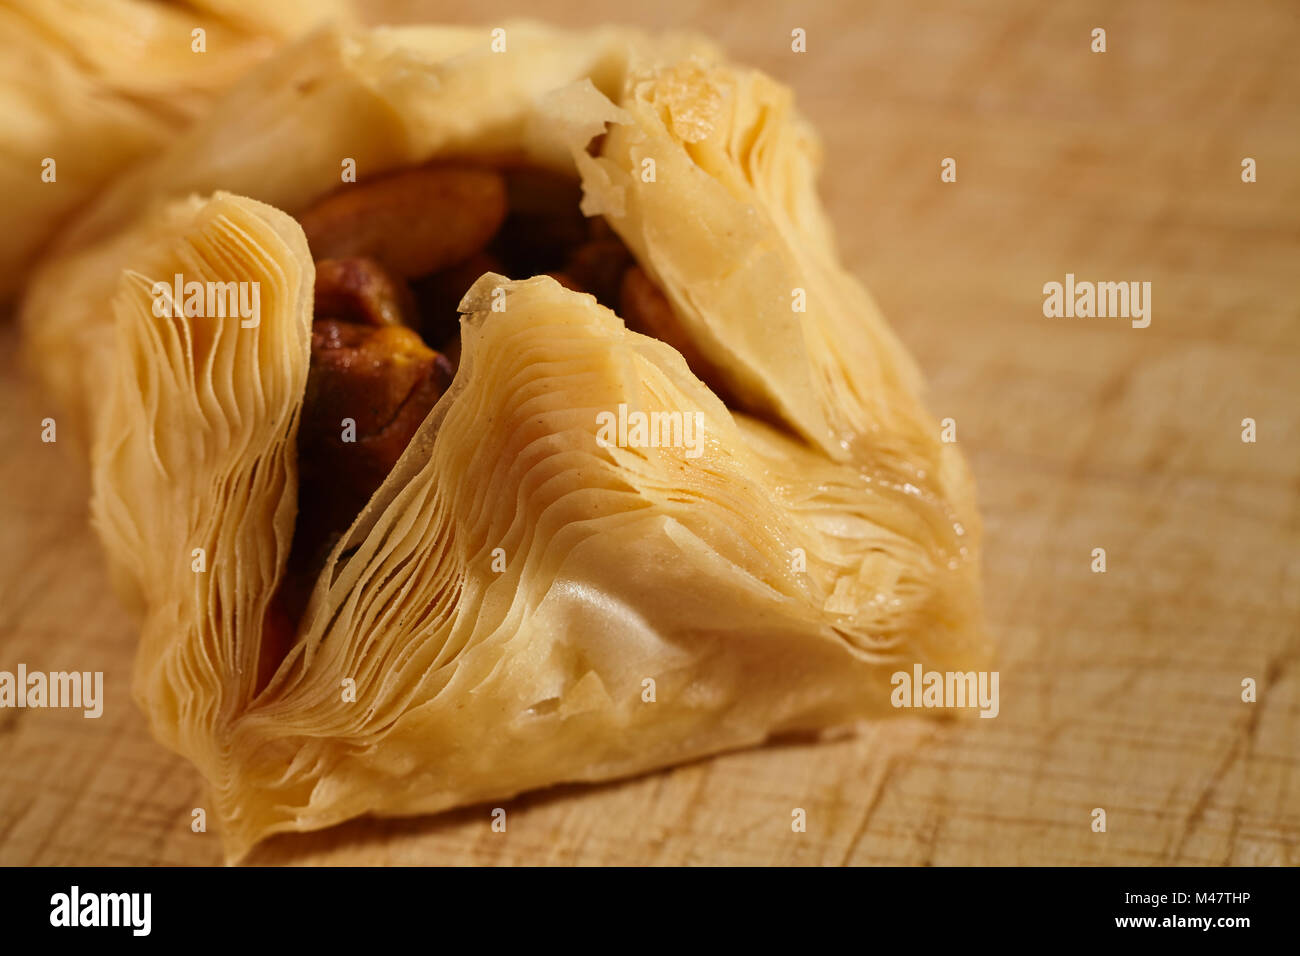 Baklava: Middle Eastern style pastry Stock Photo